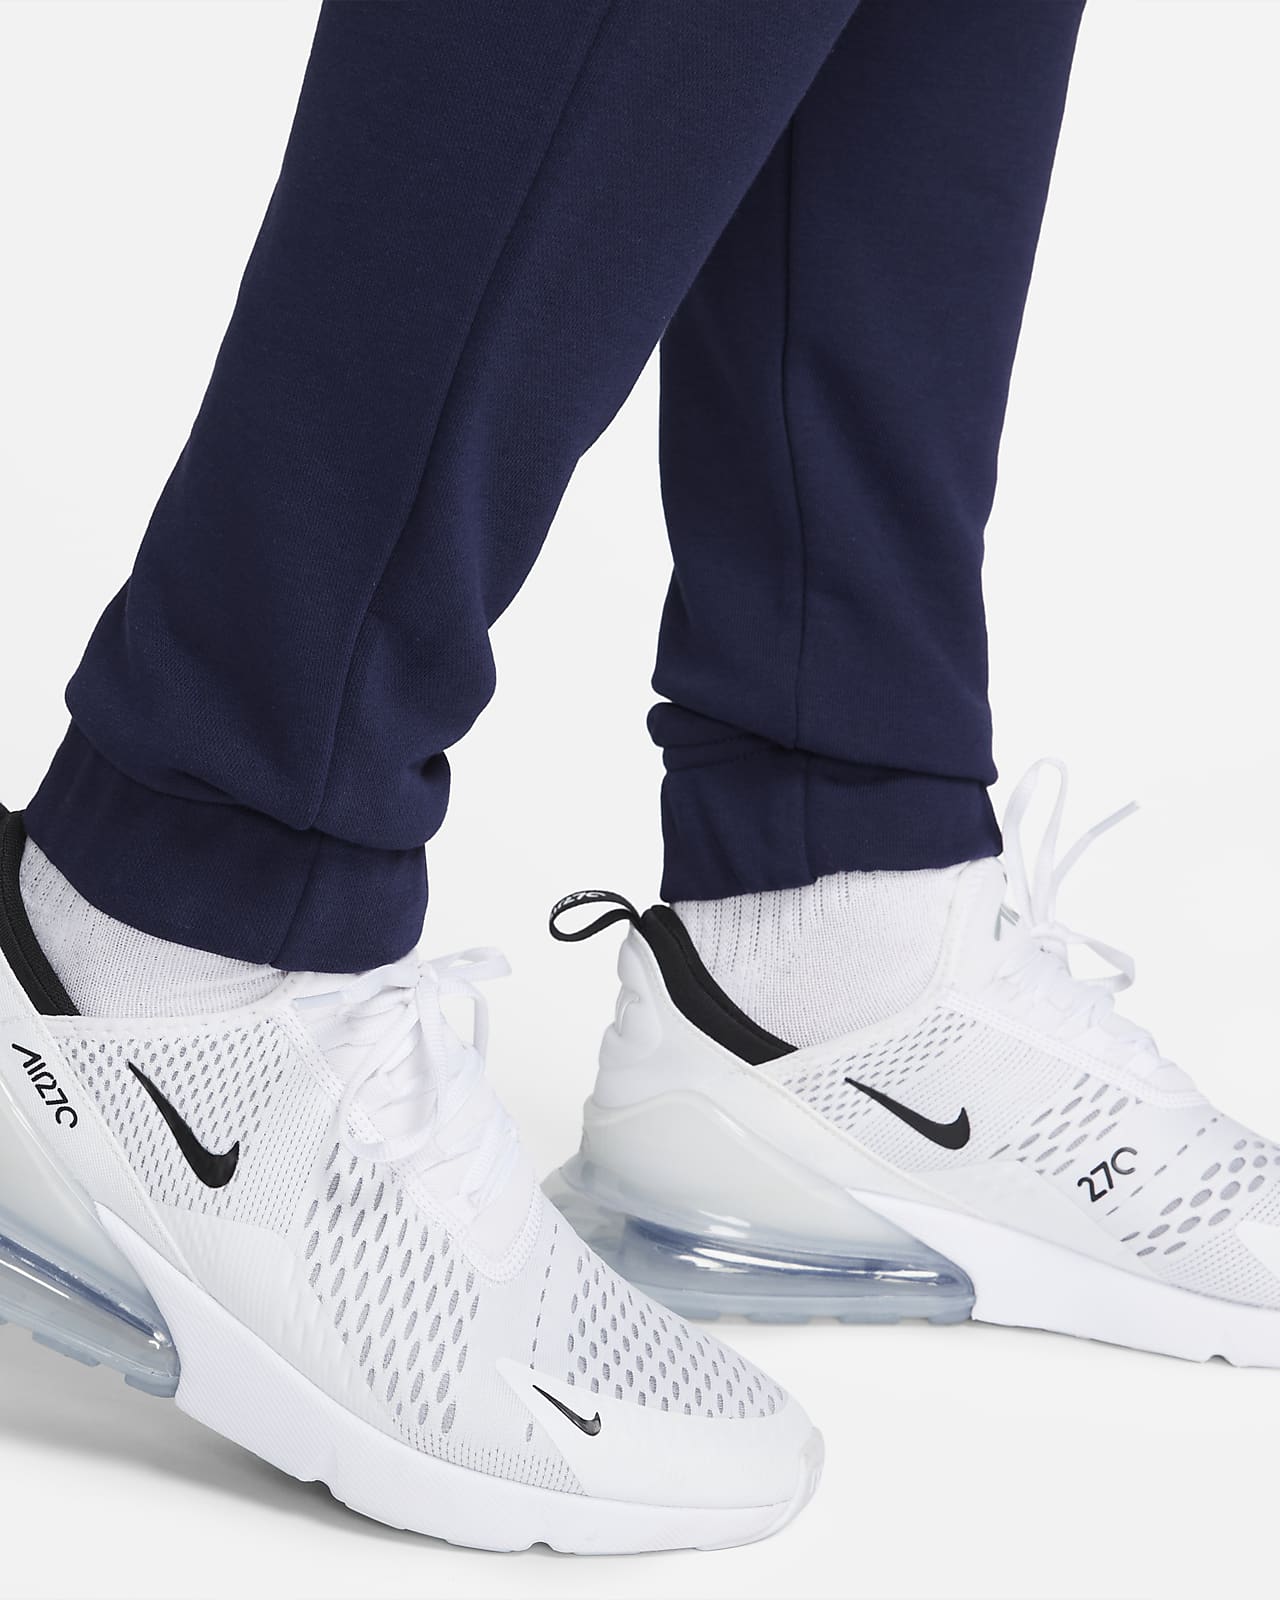 Nike Air Max 270 React ENG Blackened Blue Review & ON FEET 